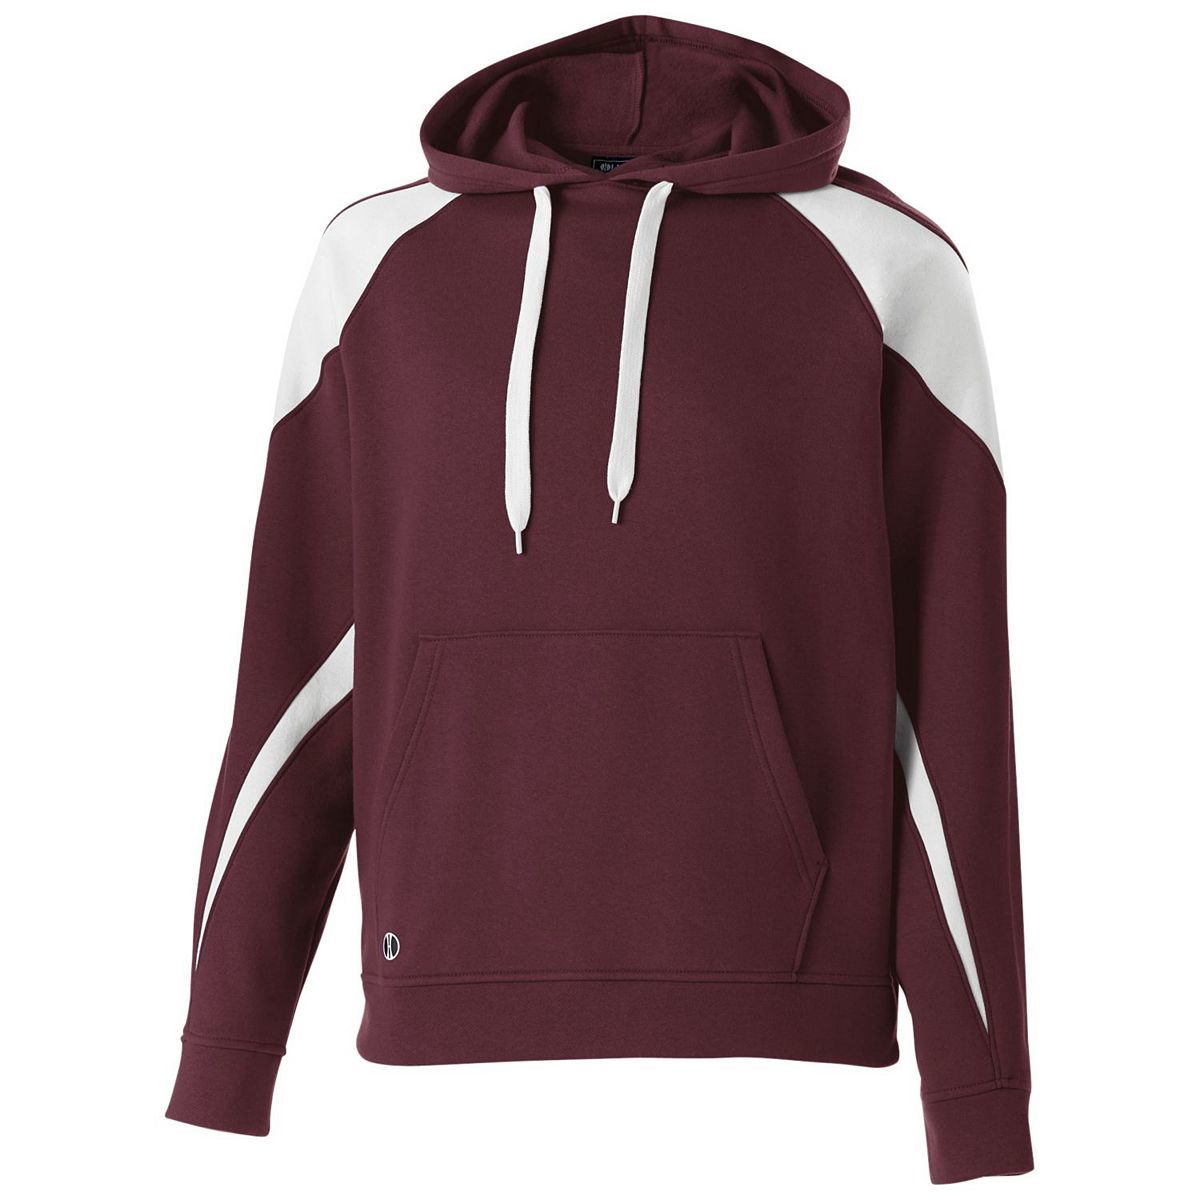 Holloway Youth Prospect Hoodie in Maroon/White  -Part of the Youth, Youth-Hoodie, Hoodies, Holloway product lines at KanaleyCreations.com